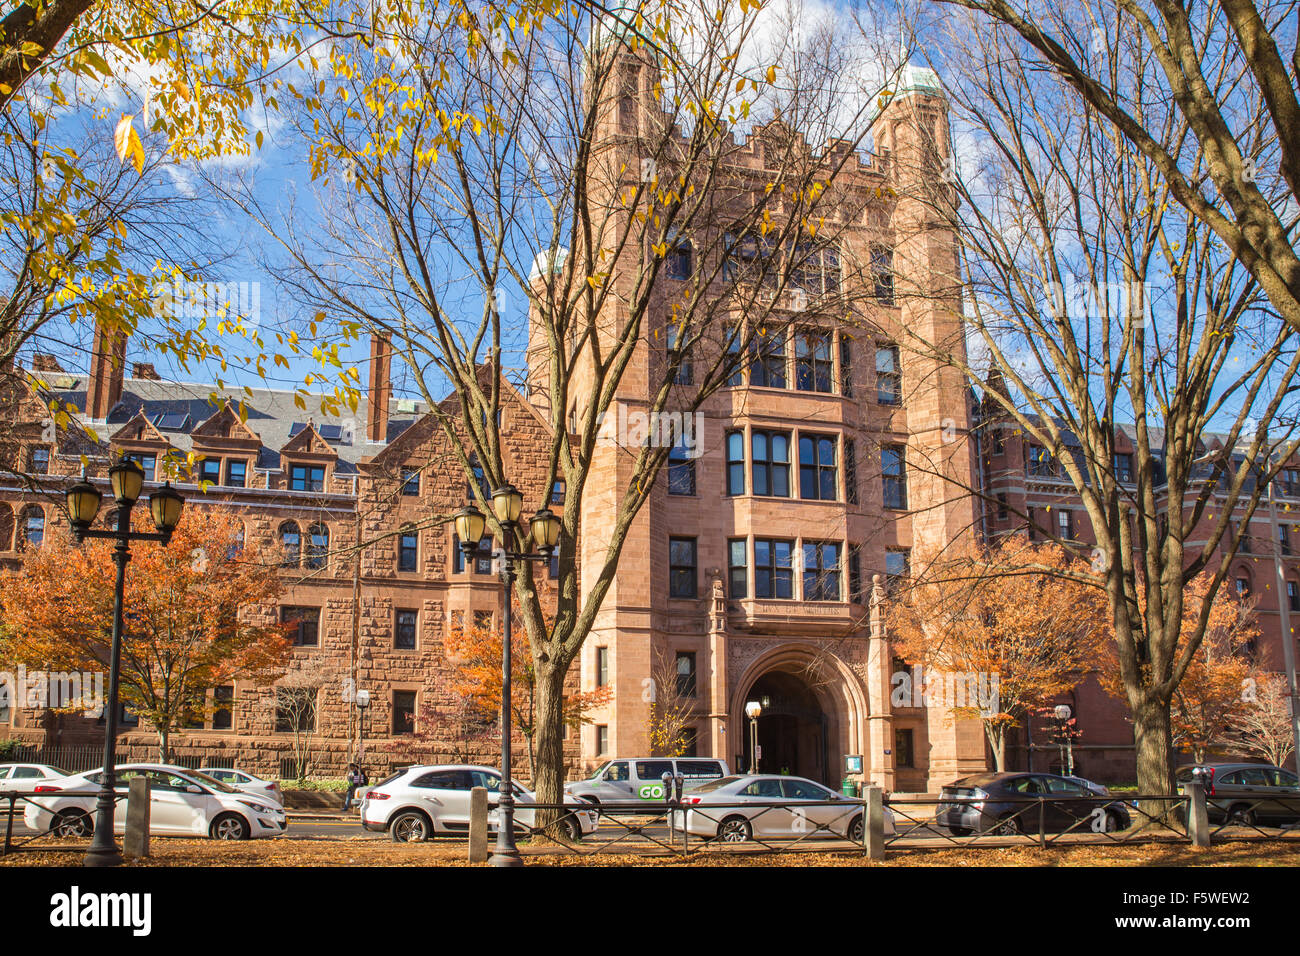 NEW HAVEN, CONNECTICUT, USA - NOVEMBER 8, 2015: View of Phelps Hall and Gate at historic Yale University on an autumn day. Stock Photo